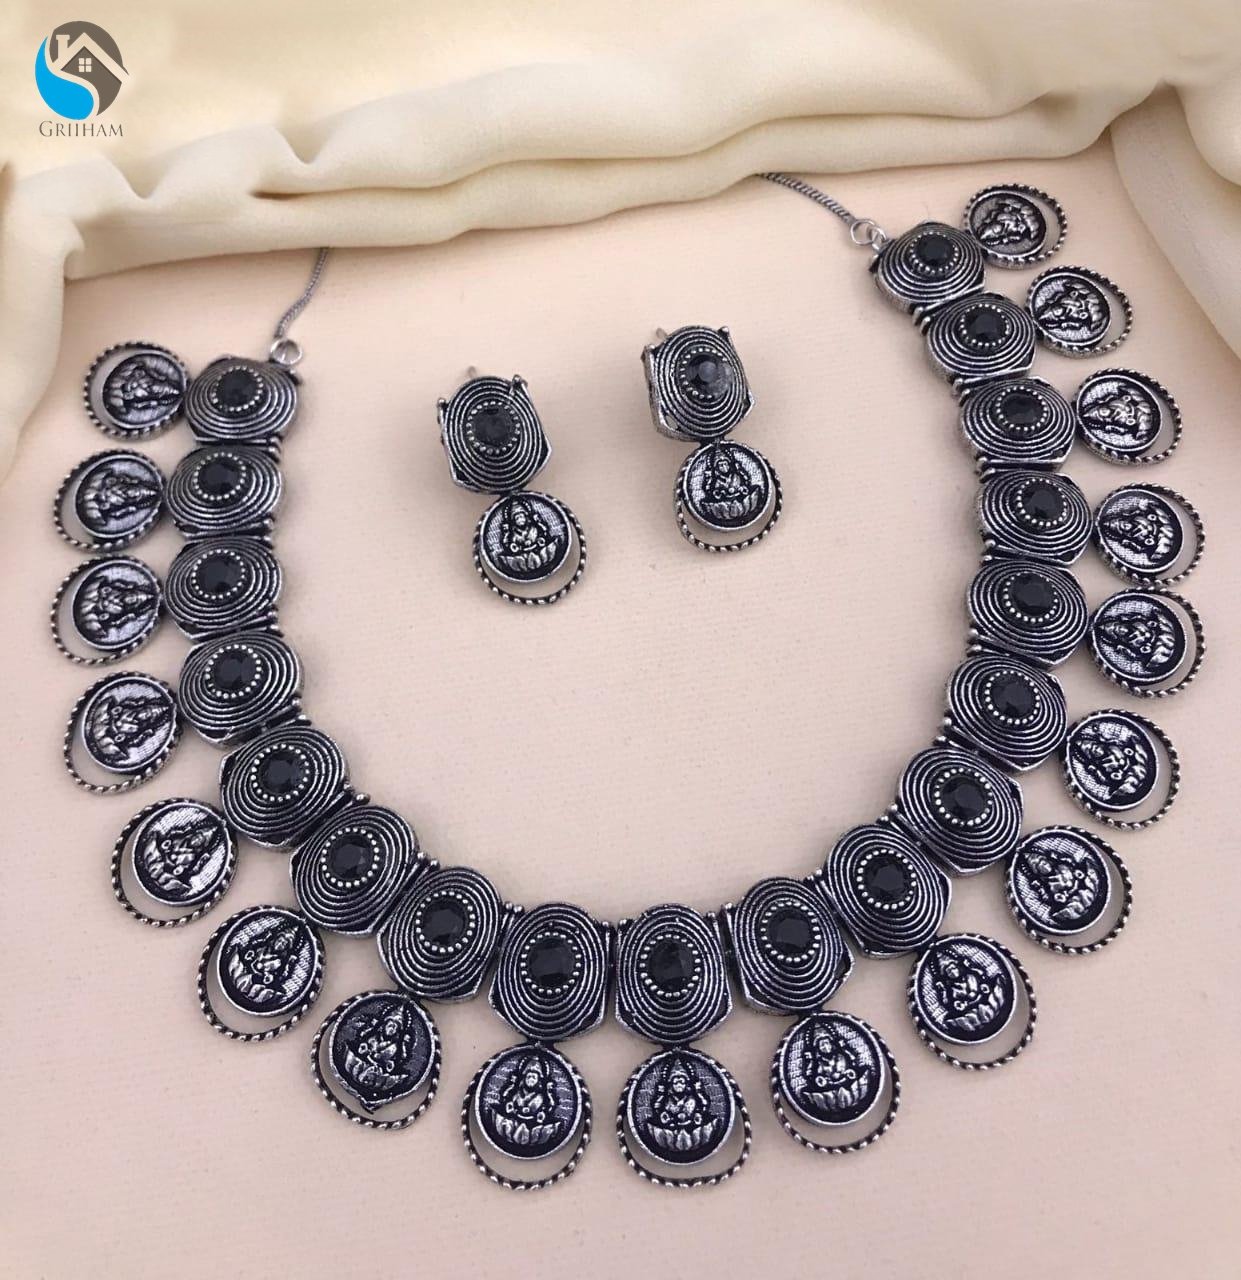 Silver Oxidised Laxmi Jewelry with Black Colour Stones Modern concept NNJ10-311-5186N